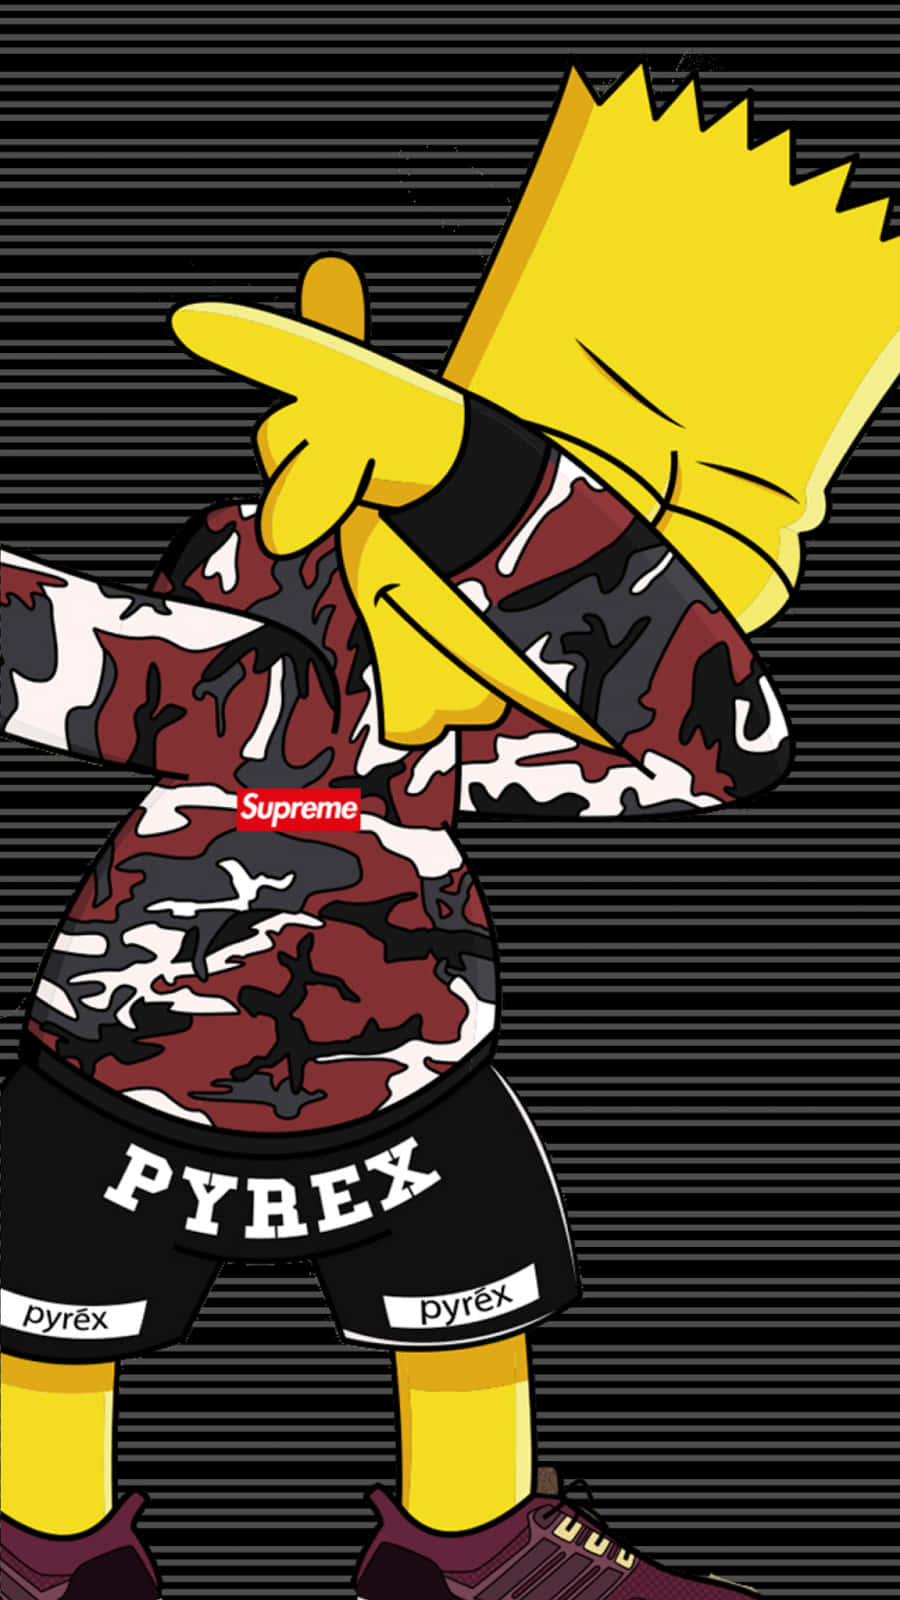 Supreme Bart Simpson is poised and ready for a skate sesh. Wallpaper